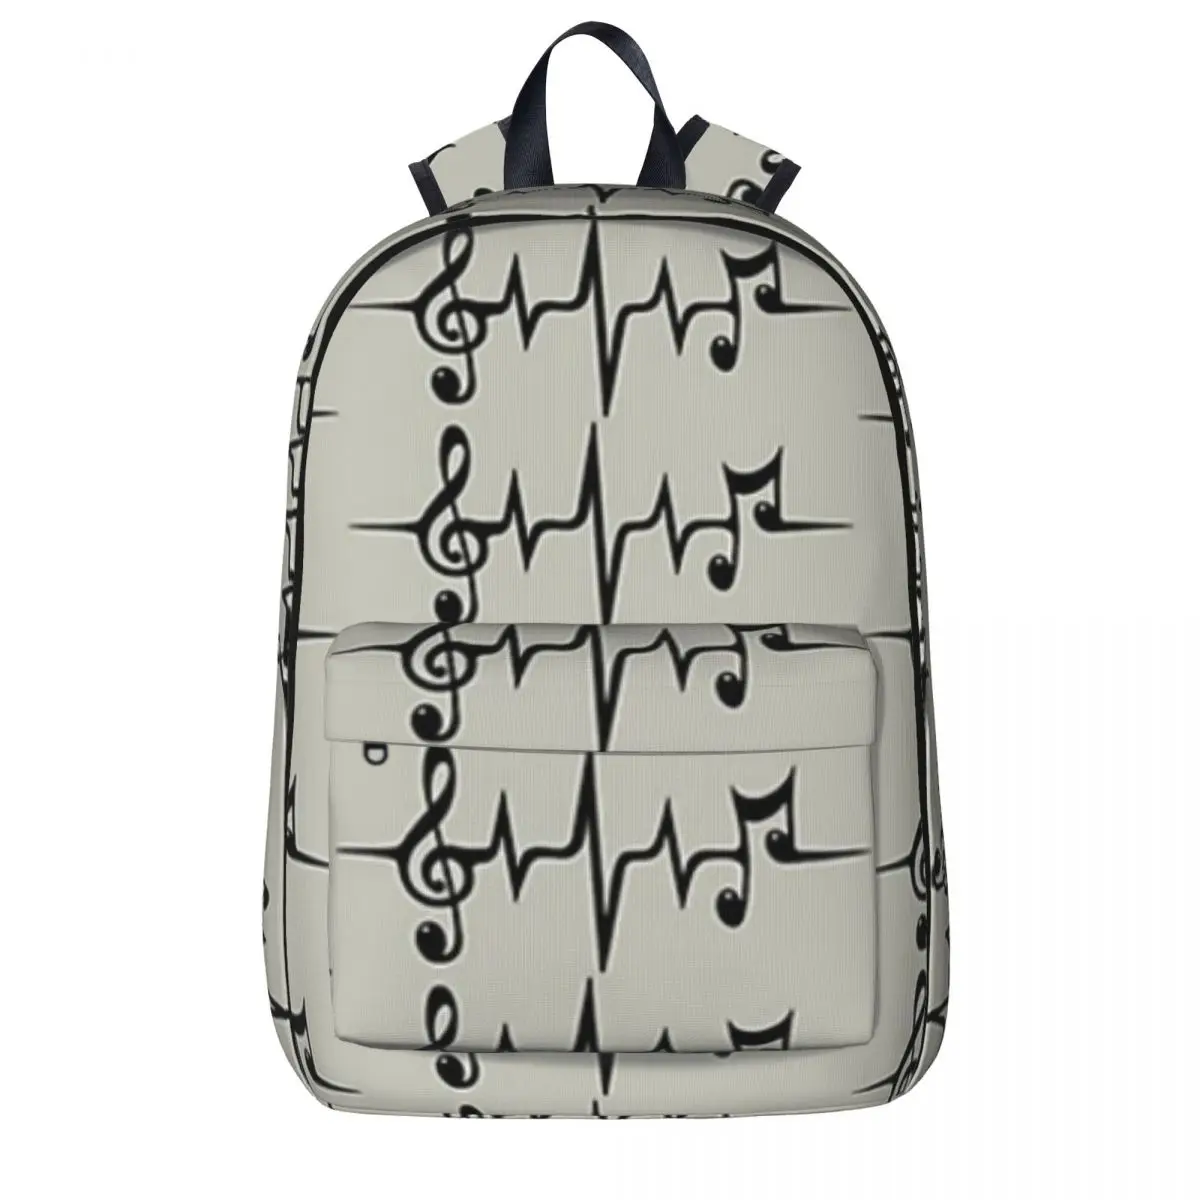 

Music Pulse Heartbeat Notes Clef Frequency Wave Sound Festival Backpacks Student School Bag Shoulder Bag Laptop Rucksack Casual